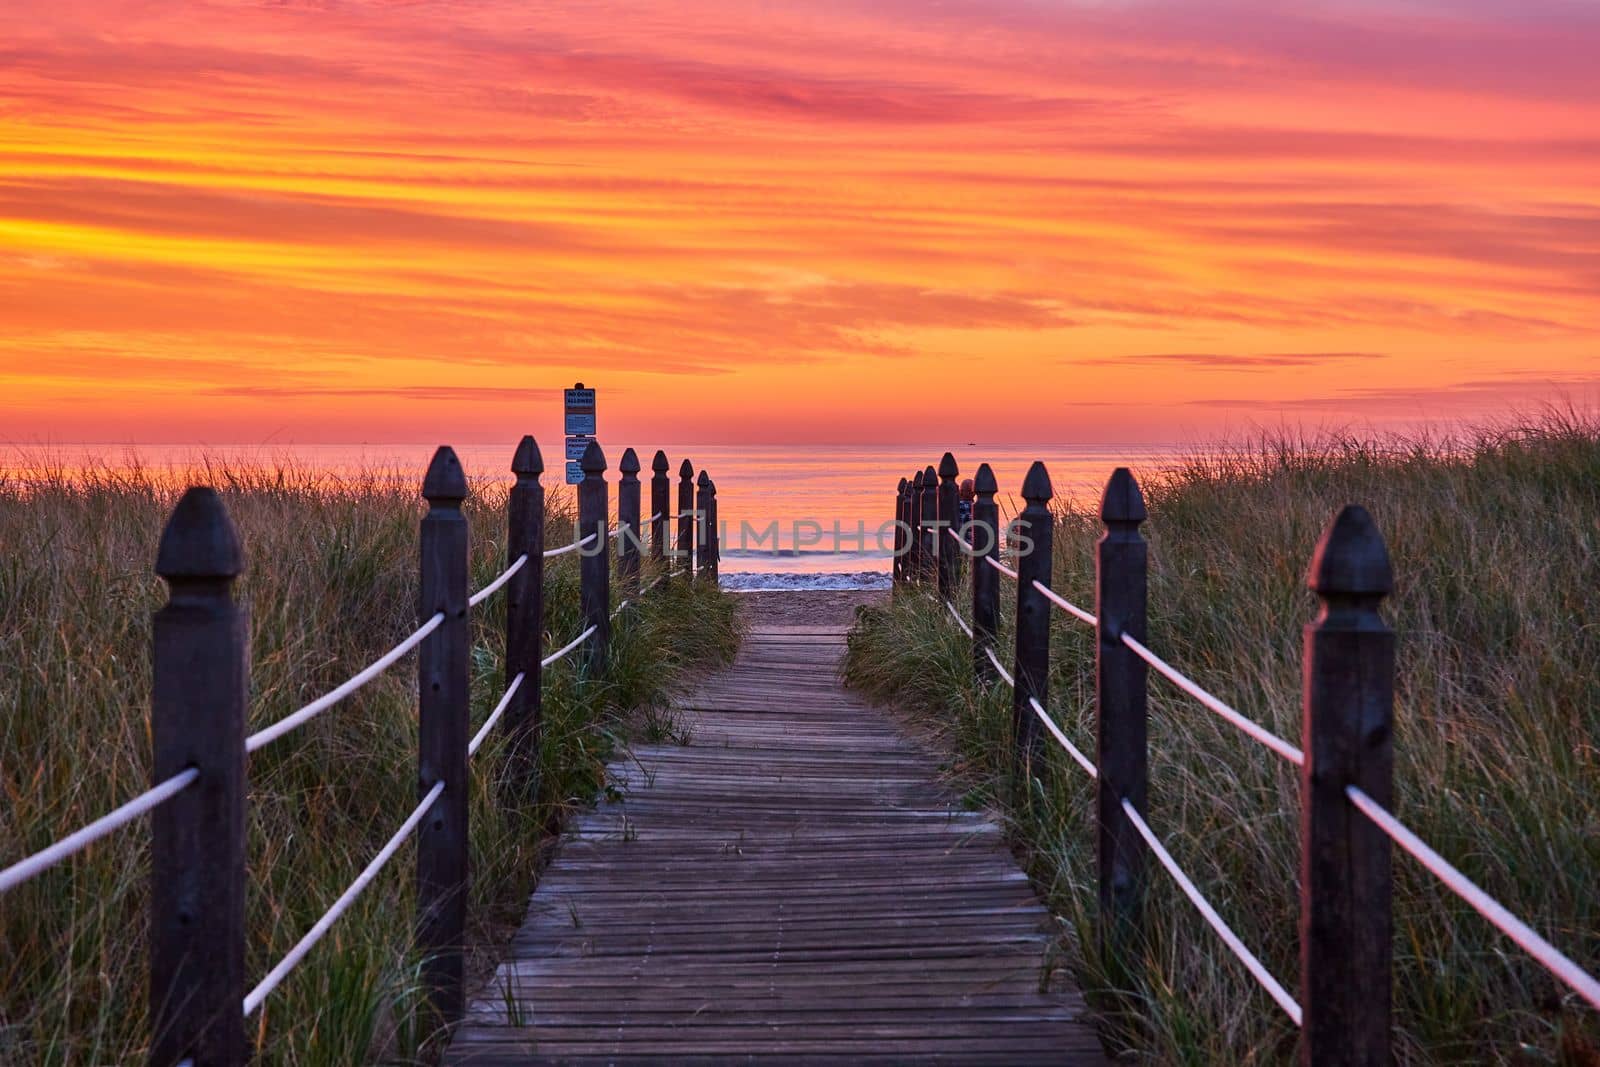 Boardwalk path leading directly to Maine east coast ocean view during stunning orange and red sunrise by njproductions